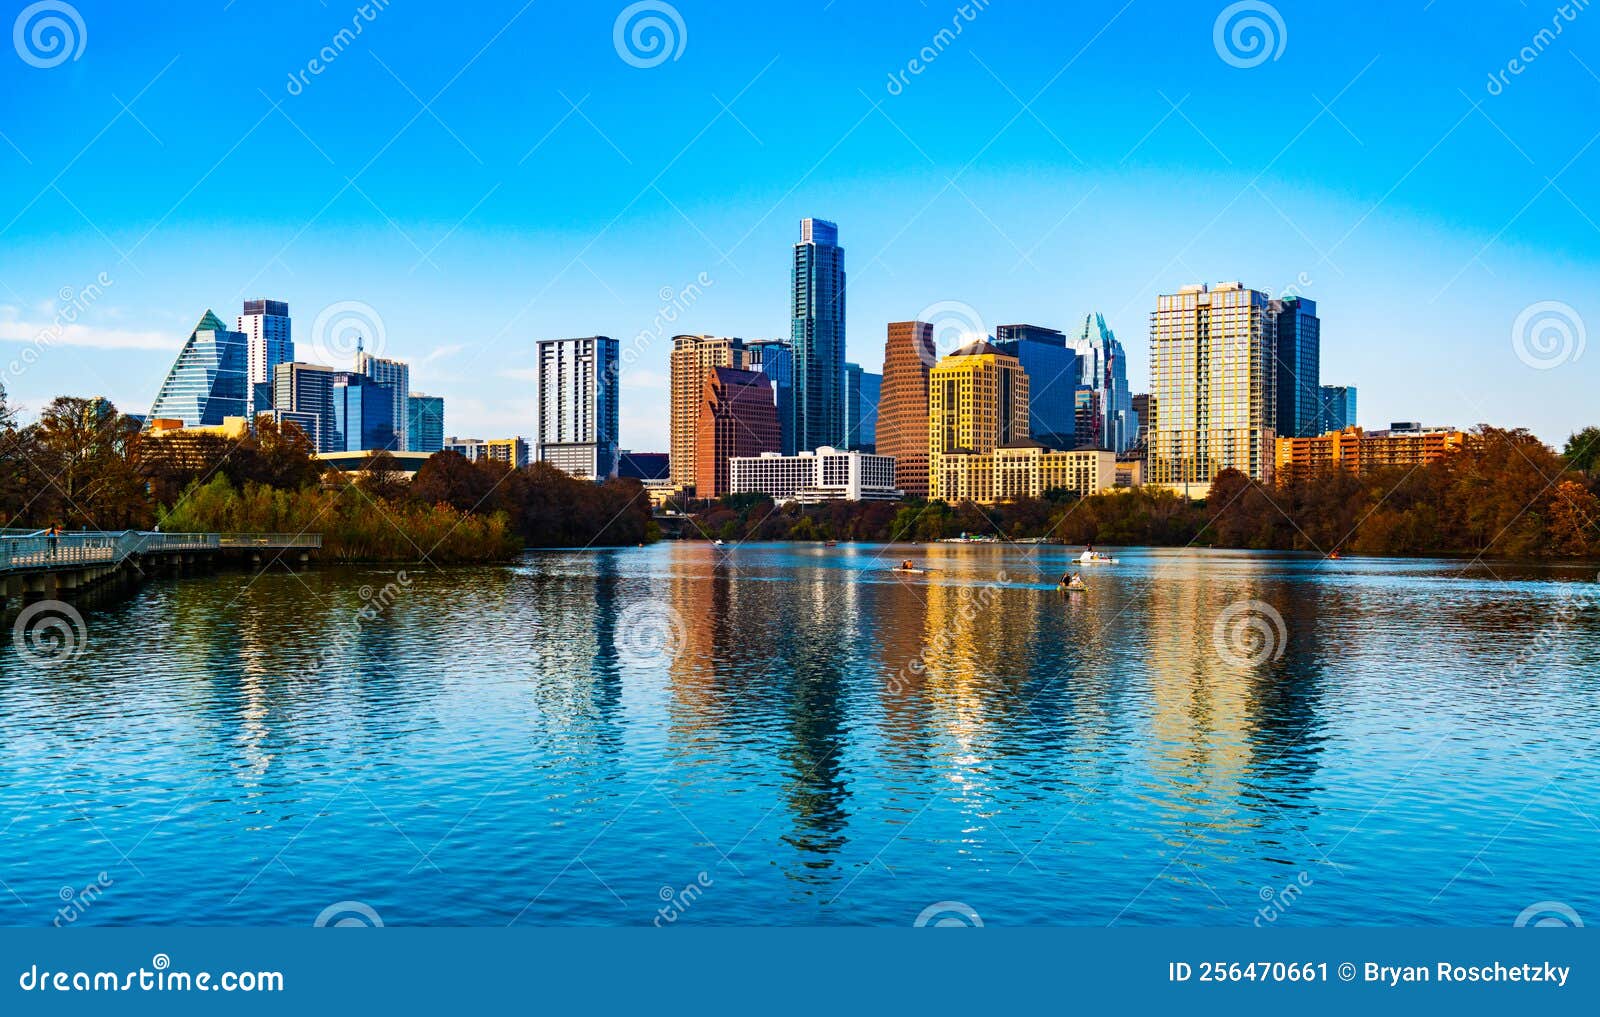 austin texas reflections of a blue town lake and sunset skyline at the pedestrian bridge on a gorgeous clear sky sunny afternoon